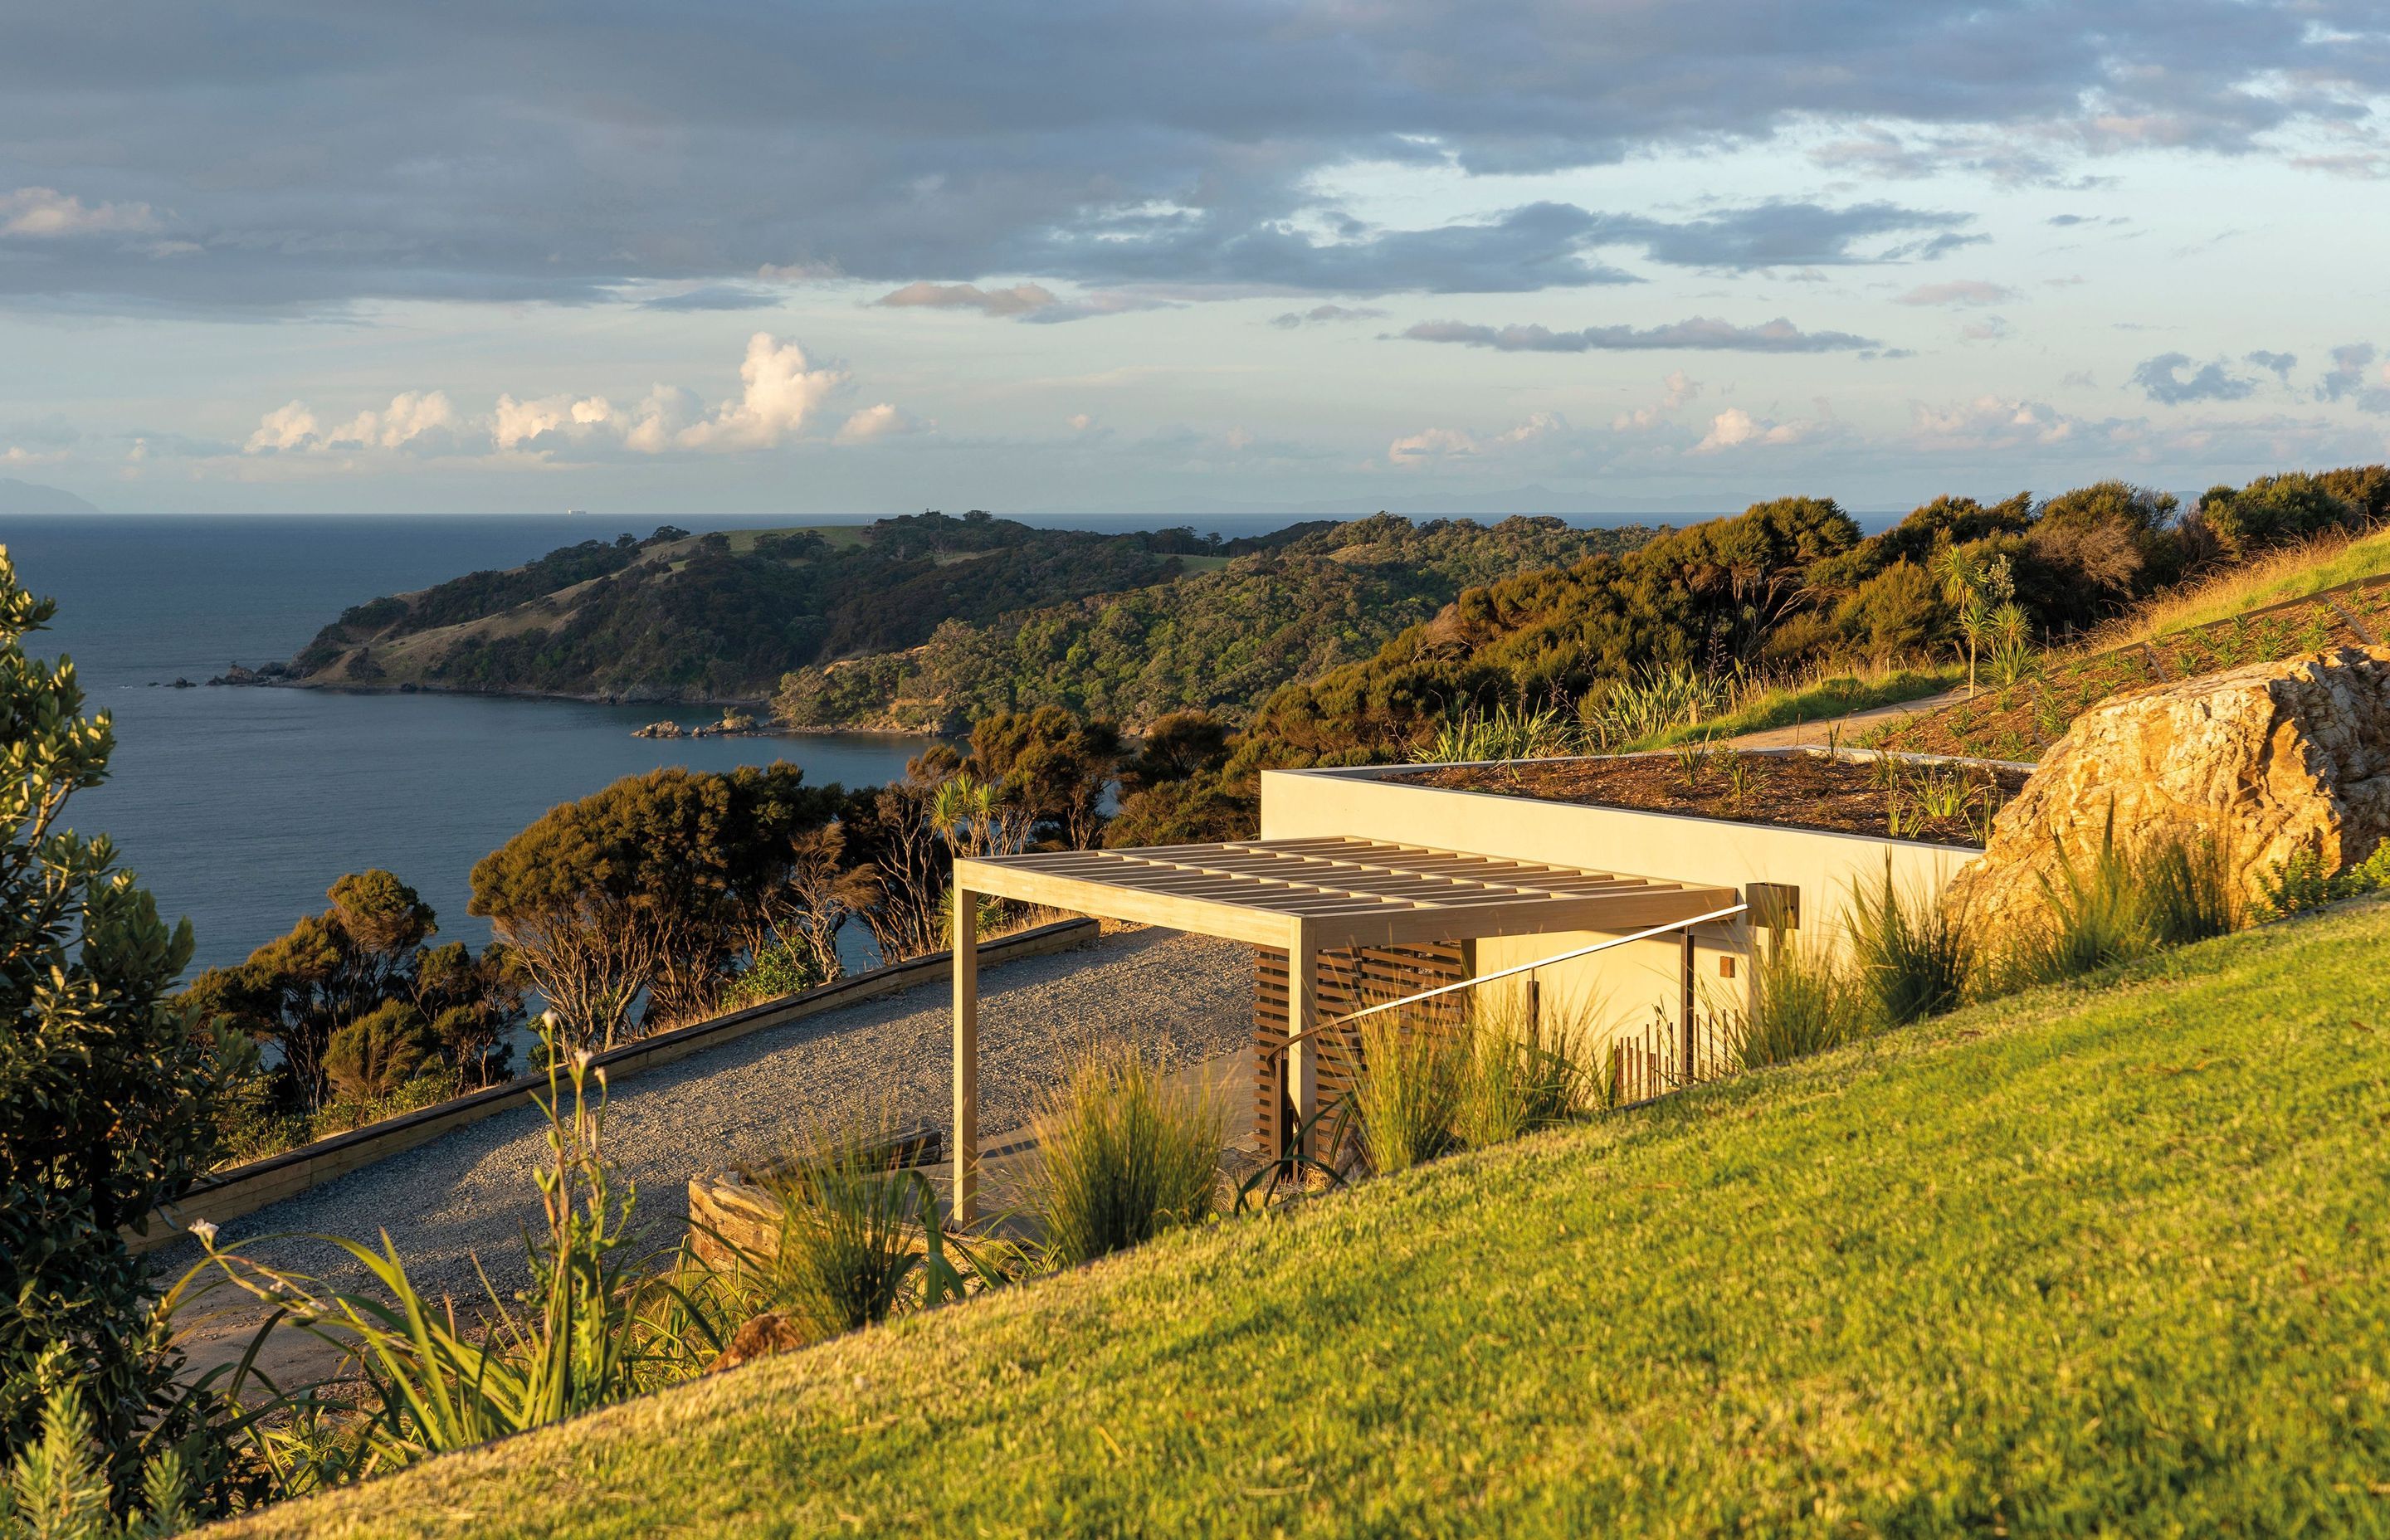 Living roofs help the dwelling to blend in with its surrounds.